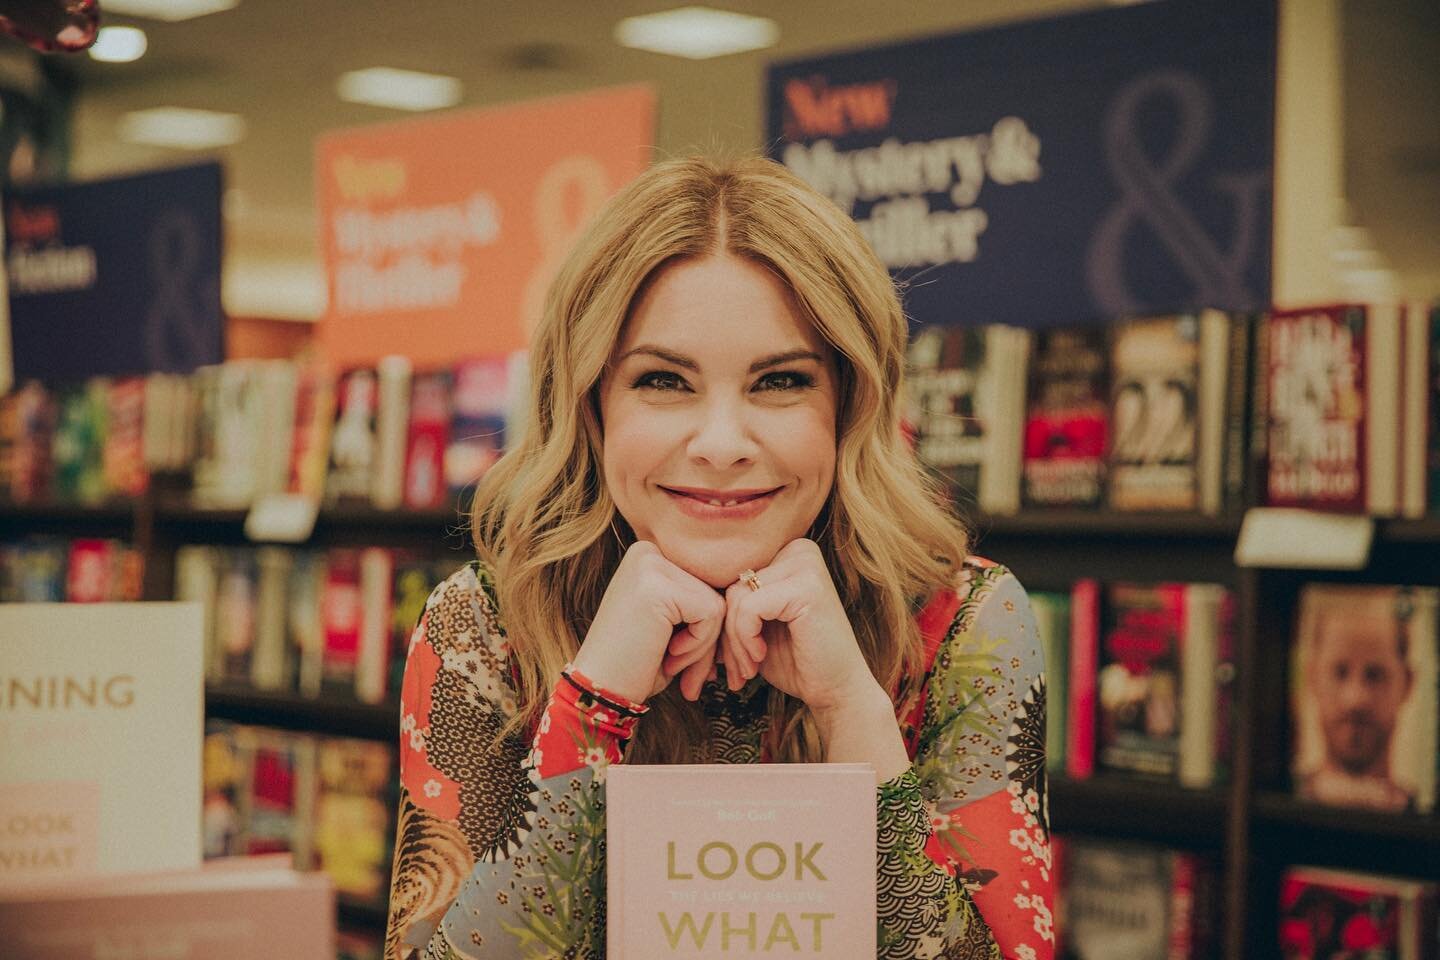 Missed my book signing? 😂 Still need a Mother&rsquo;s Day gift?? @barnesandnoble has autographed copies of my new book, Look What You&rsquo;ve Done, in stock! I&rsquo;ll put the link in my stories. ❤️